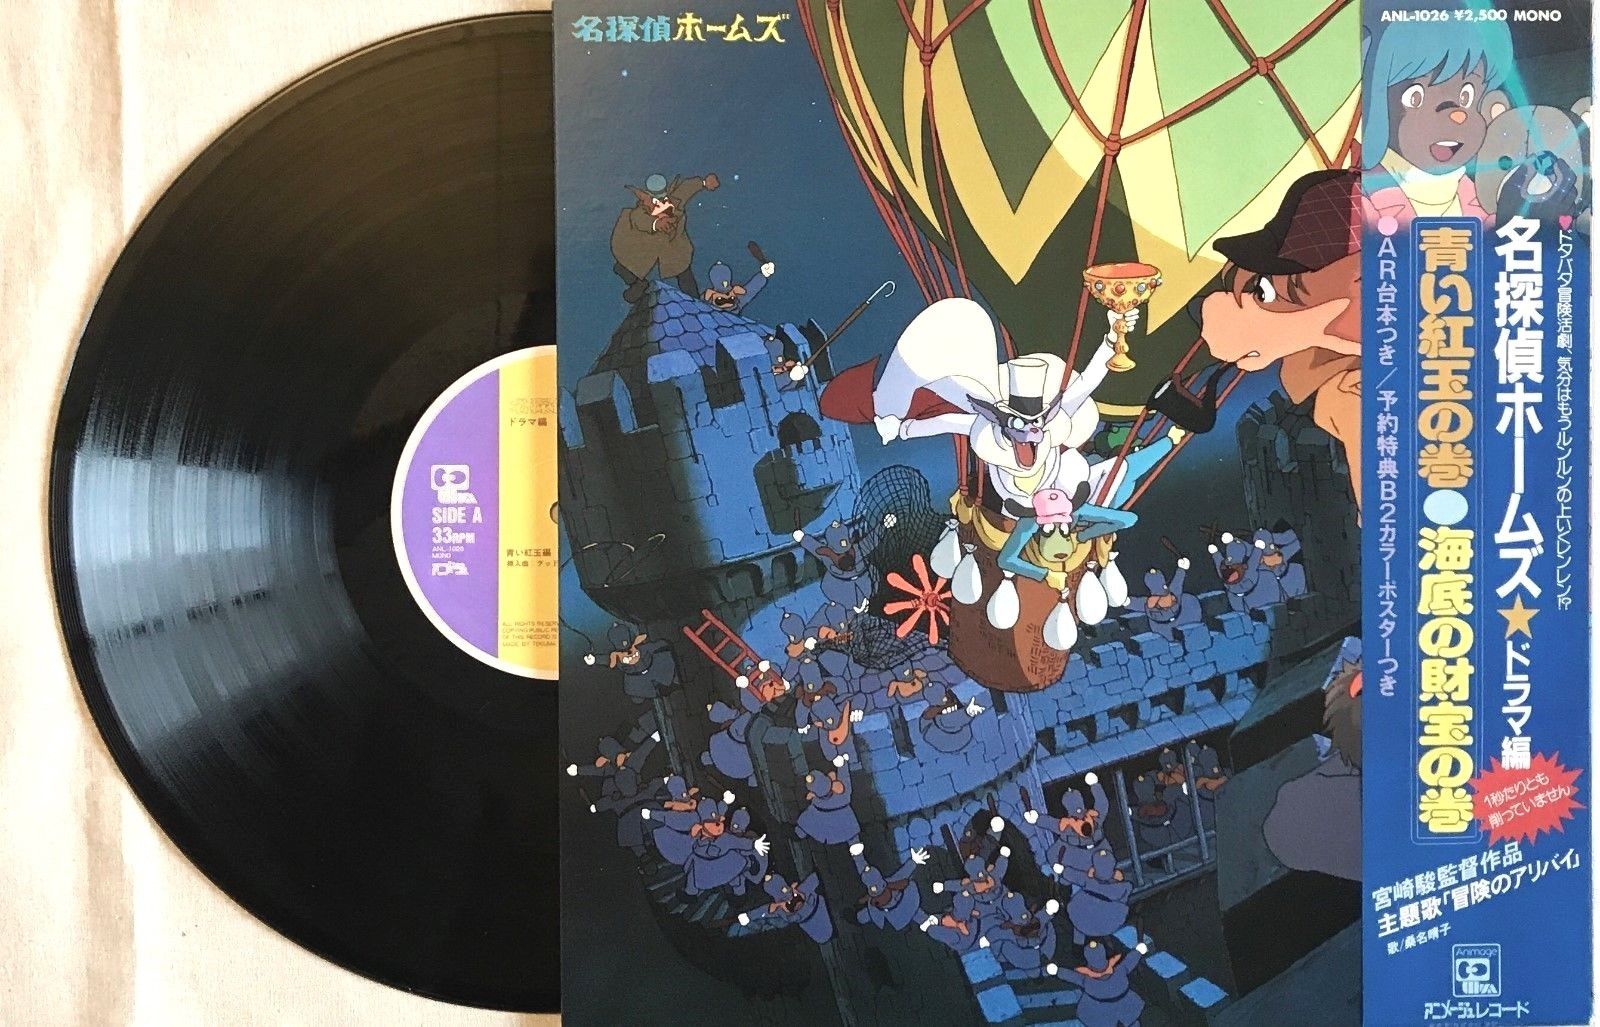 30+ Anime Records That You Didn't Know About - Anime Galaxy